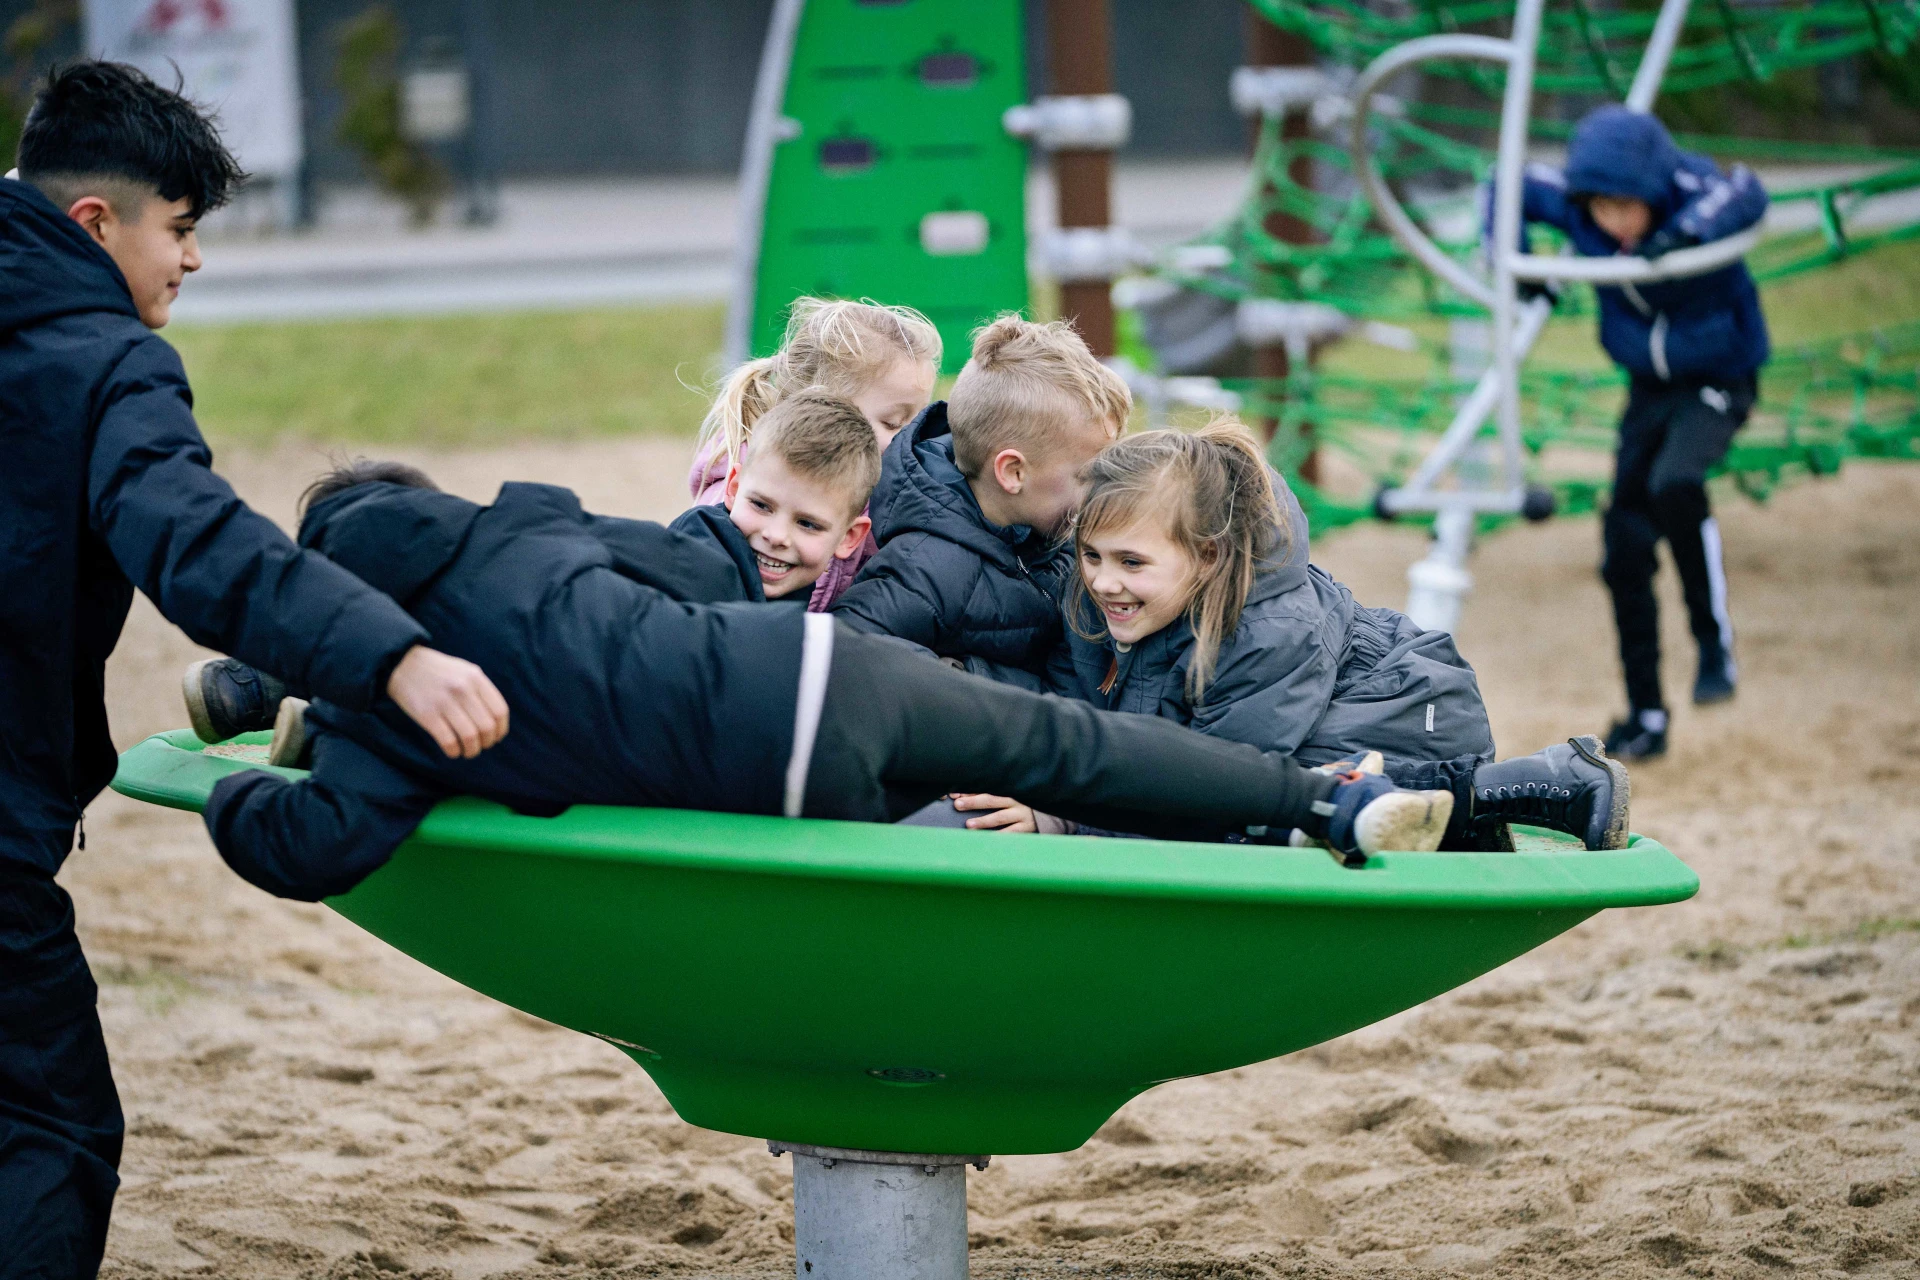 Children on a playground spinning on a new Spinner Disc